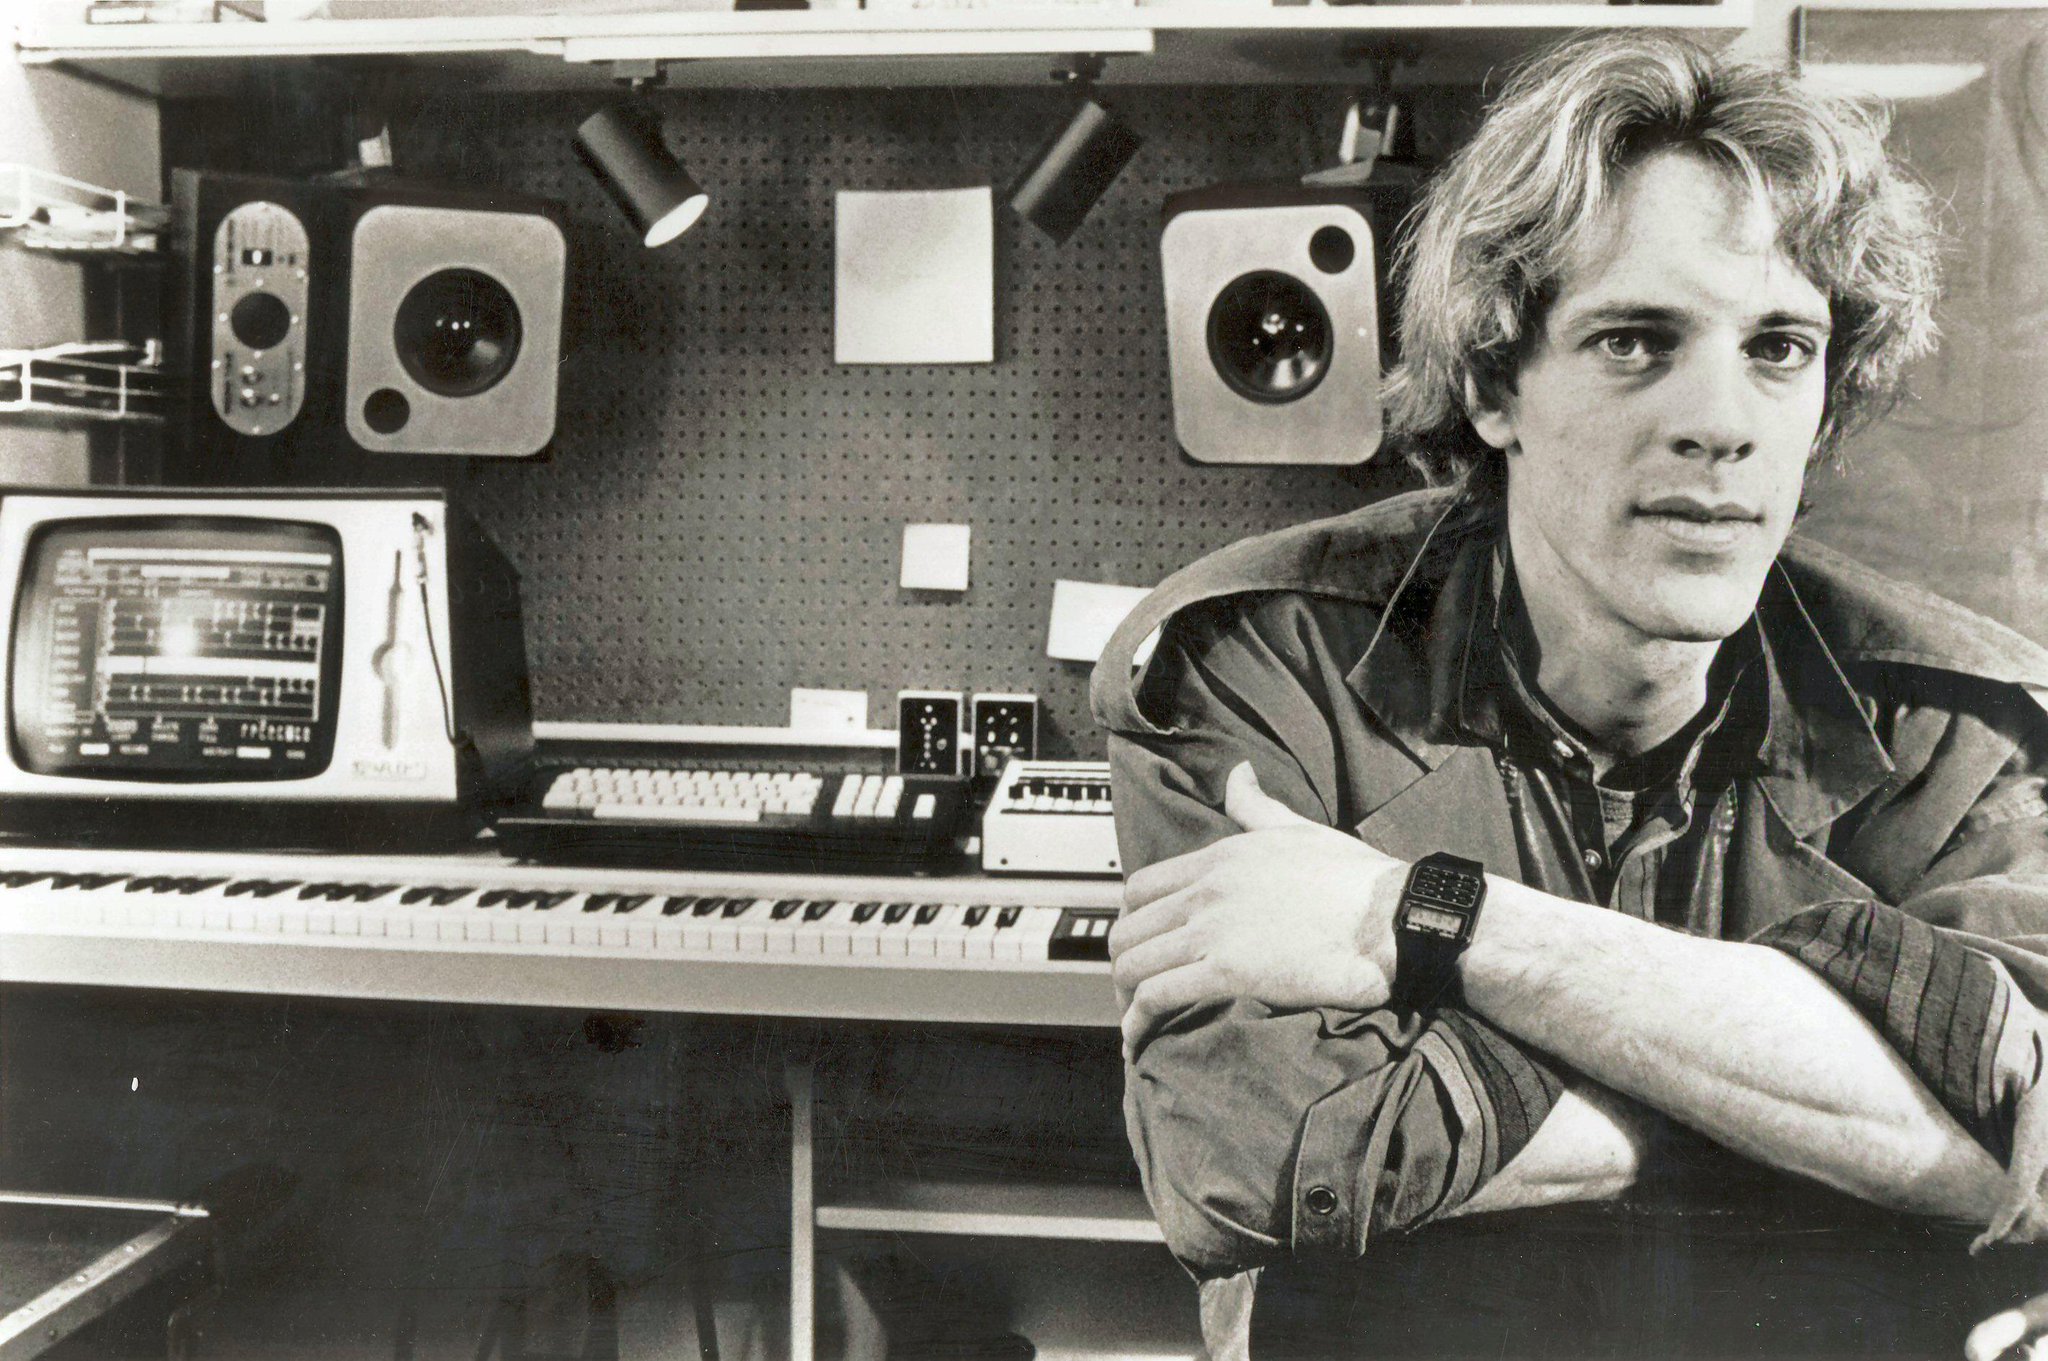 Happy birthday, Stewart Copeland! Drummer for the English rock band, The Police. 